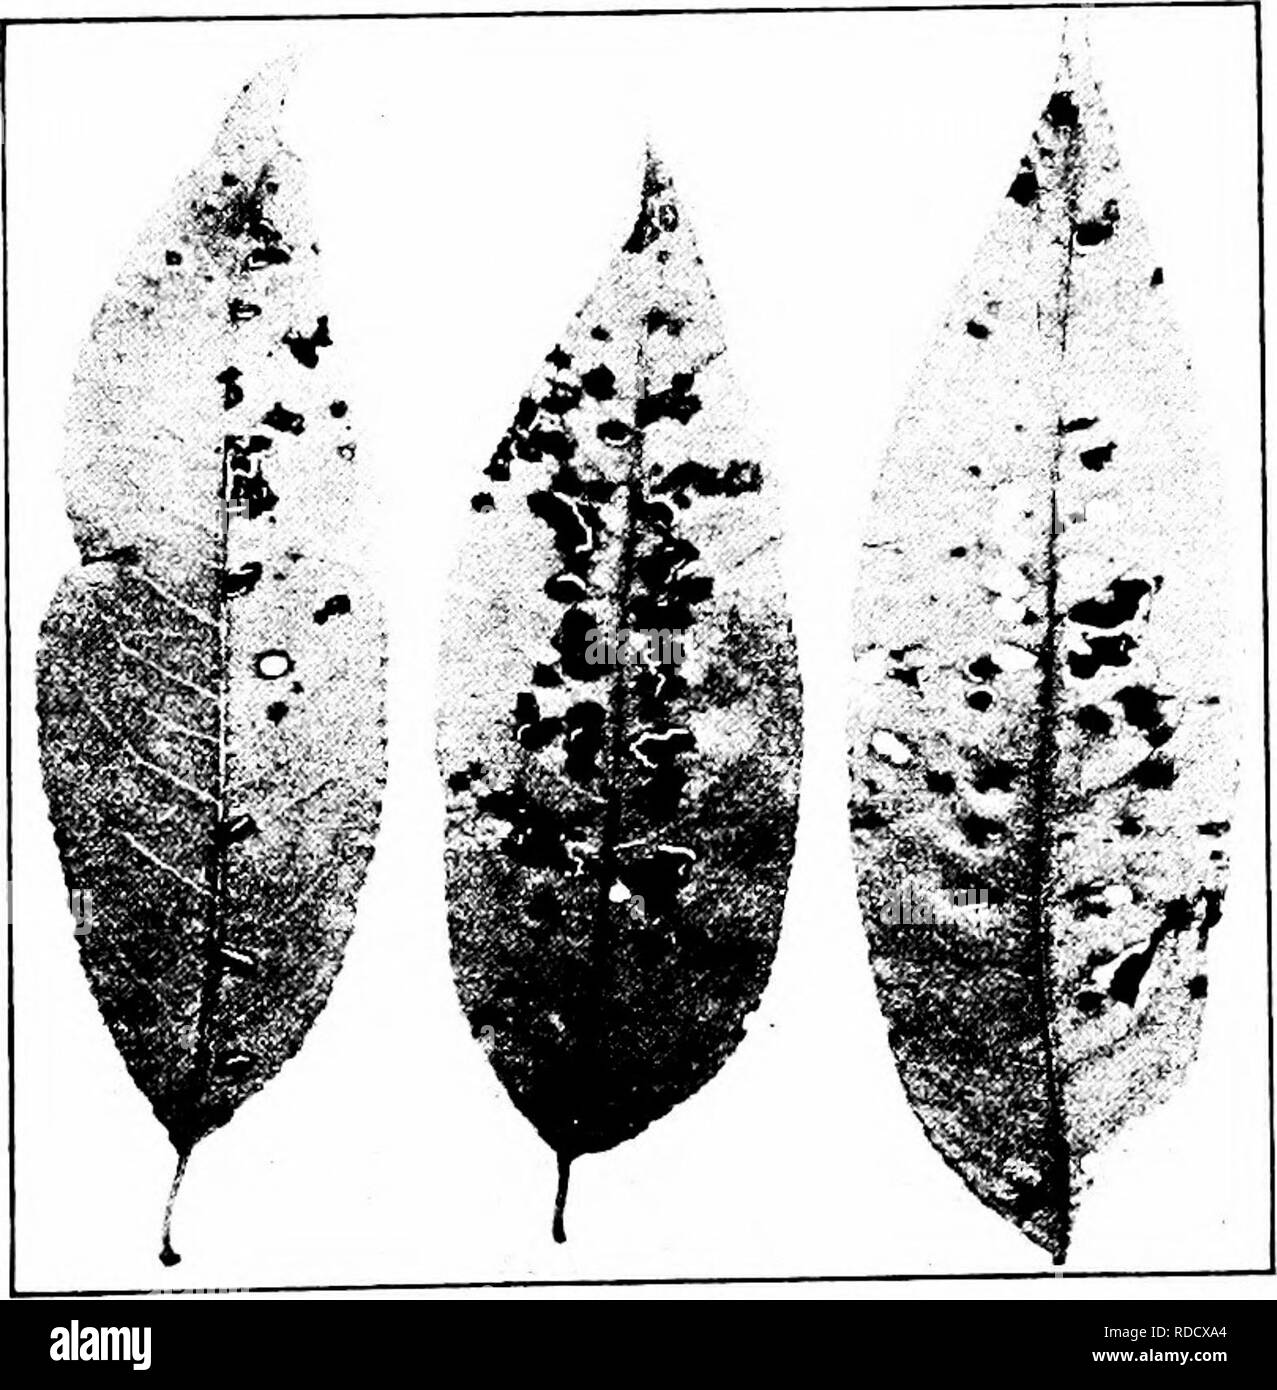 . Manual of fruit diseases . Fruit. PEACH DISEASES 307 of the normal number, so that the next year's crop of peaches will be materially lightened. Young trees suffer severely; when badly diseased, they become stunted and in some cases are permanently injured. It should be stated that black-spot affects not only the fruit, foliage and twigs of the peach, but also these same organs of the apricot, nectarine and plum, making four prominent and important stone-fruit trees in the category of hosts for the black-spot pathogene. This fact adds to the economic aspect of this disease. Of the peaches th Stock Photo